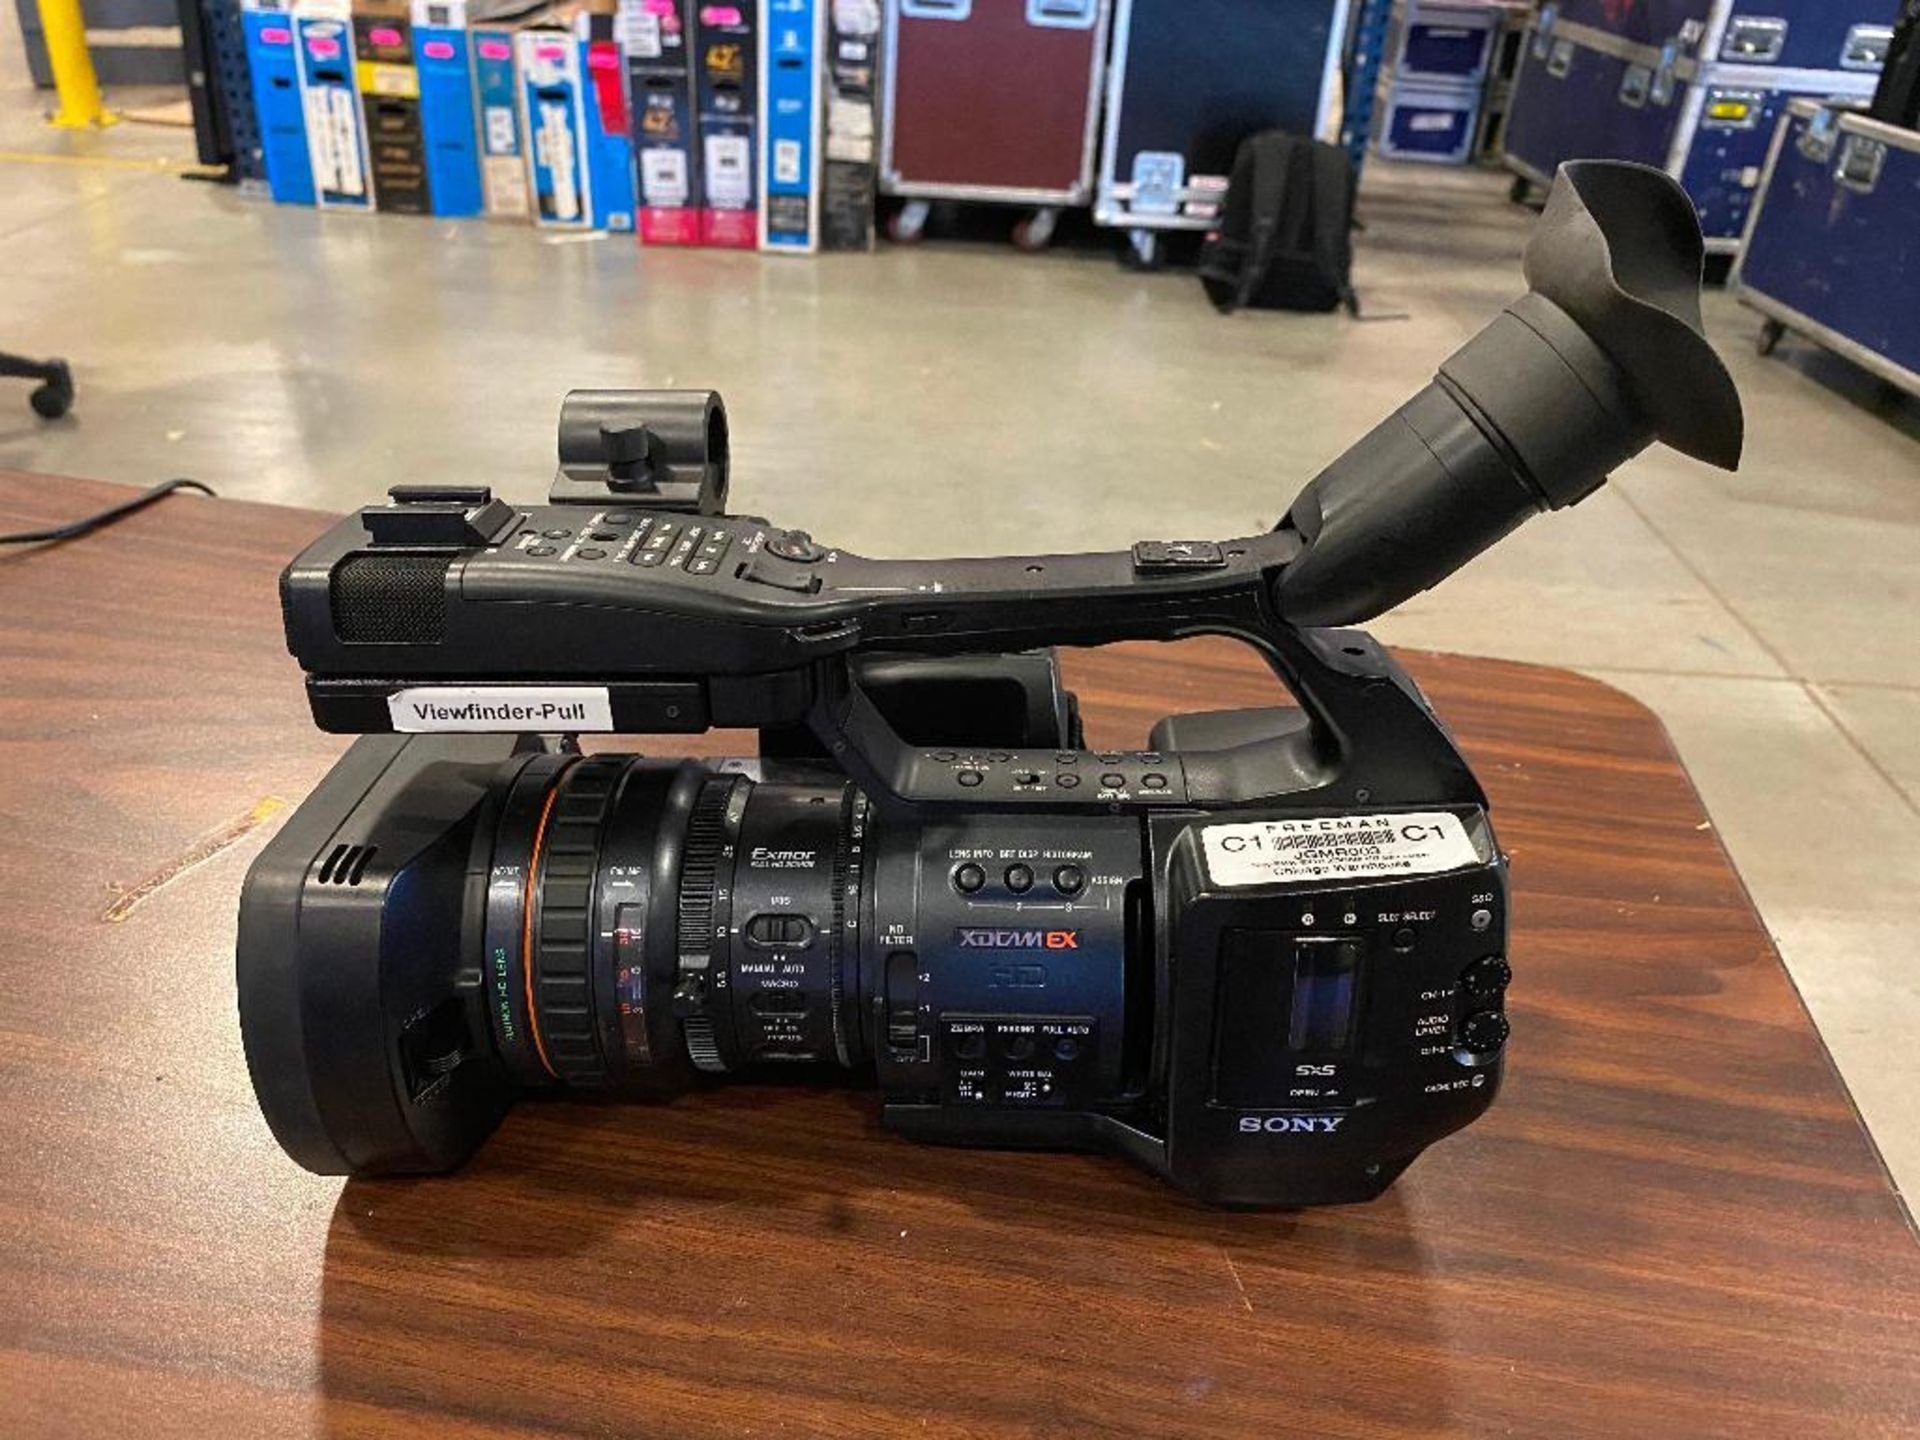 DESCRIPTION SONY PMW-EX1R EX FULL HD CAMCORDER W/ ACCESSORIES AND CARRYING KIT (SEE PHOTOS) LOCATION - Image 4 of 8